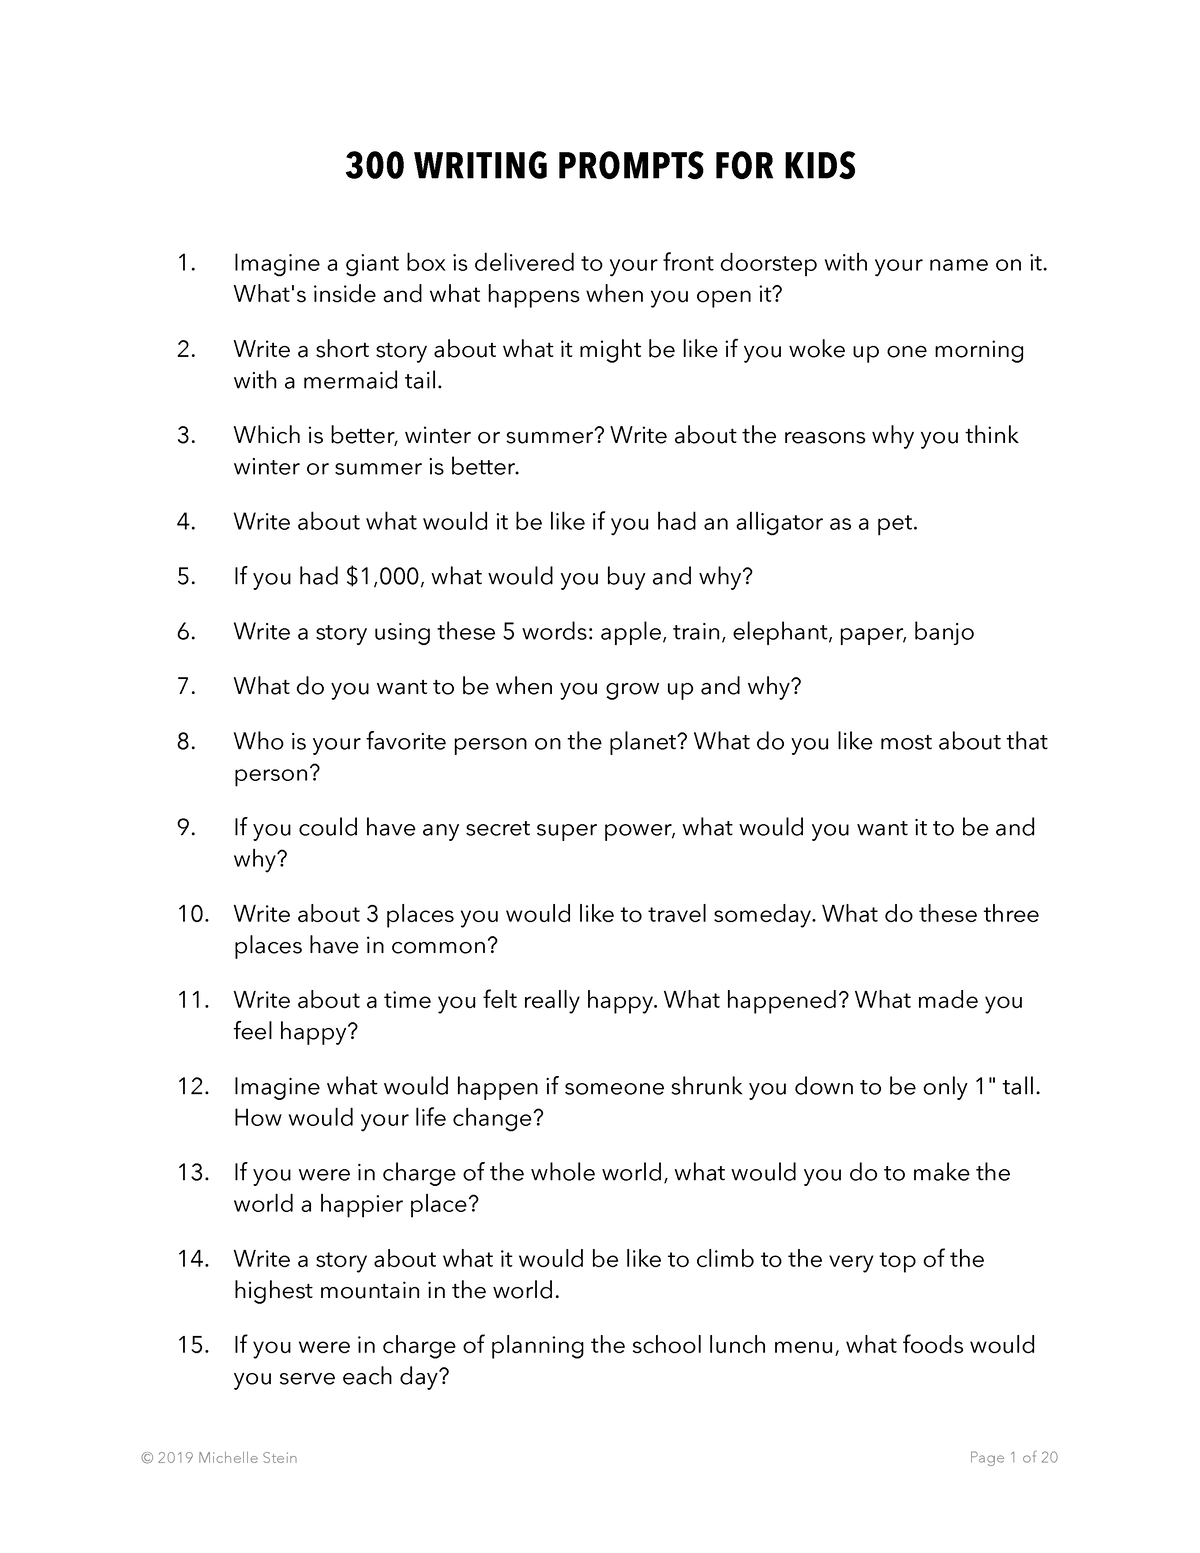 300 writing prompts for kids list - 300 WRITING PROMPTS FOR KIDS ...